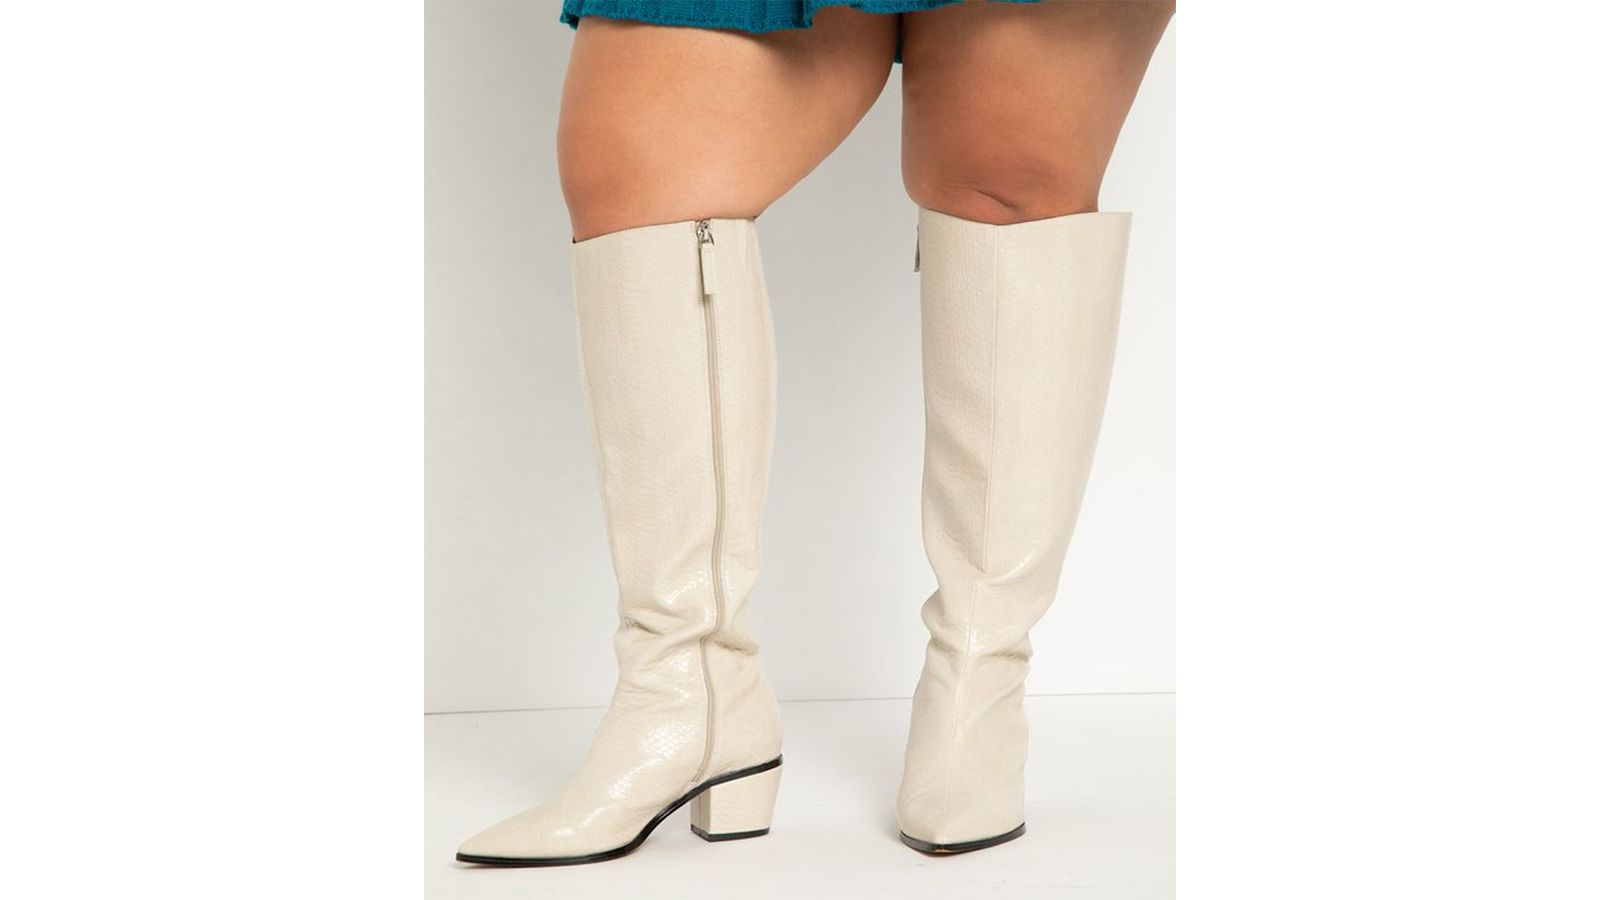 20 stylish wide-calf boots for women